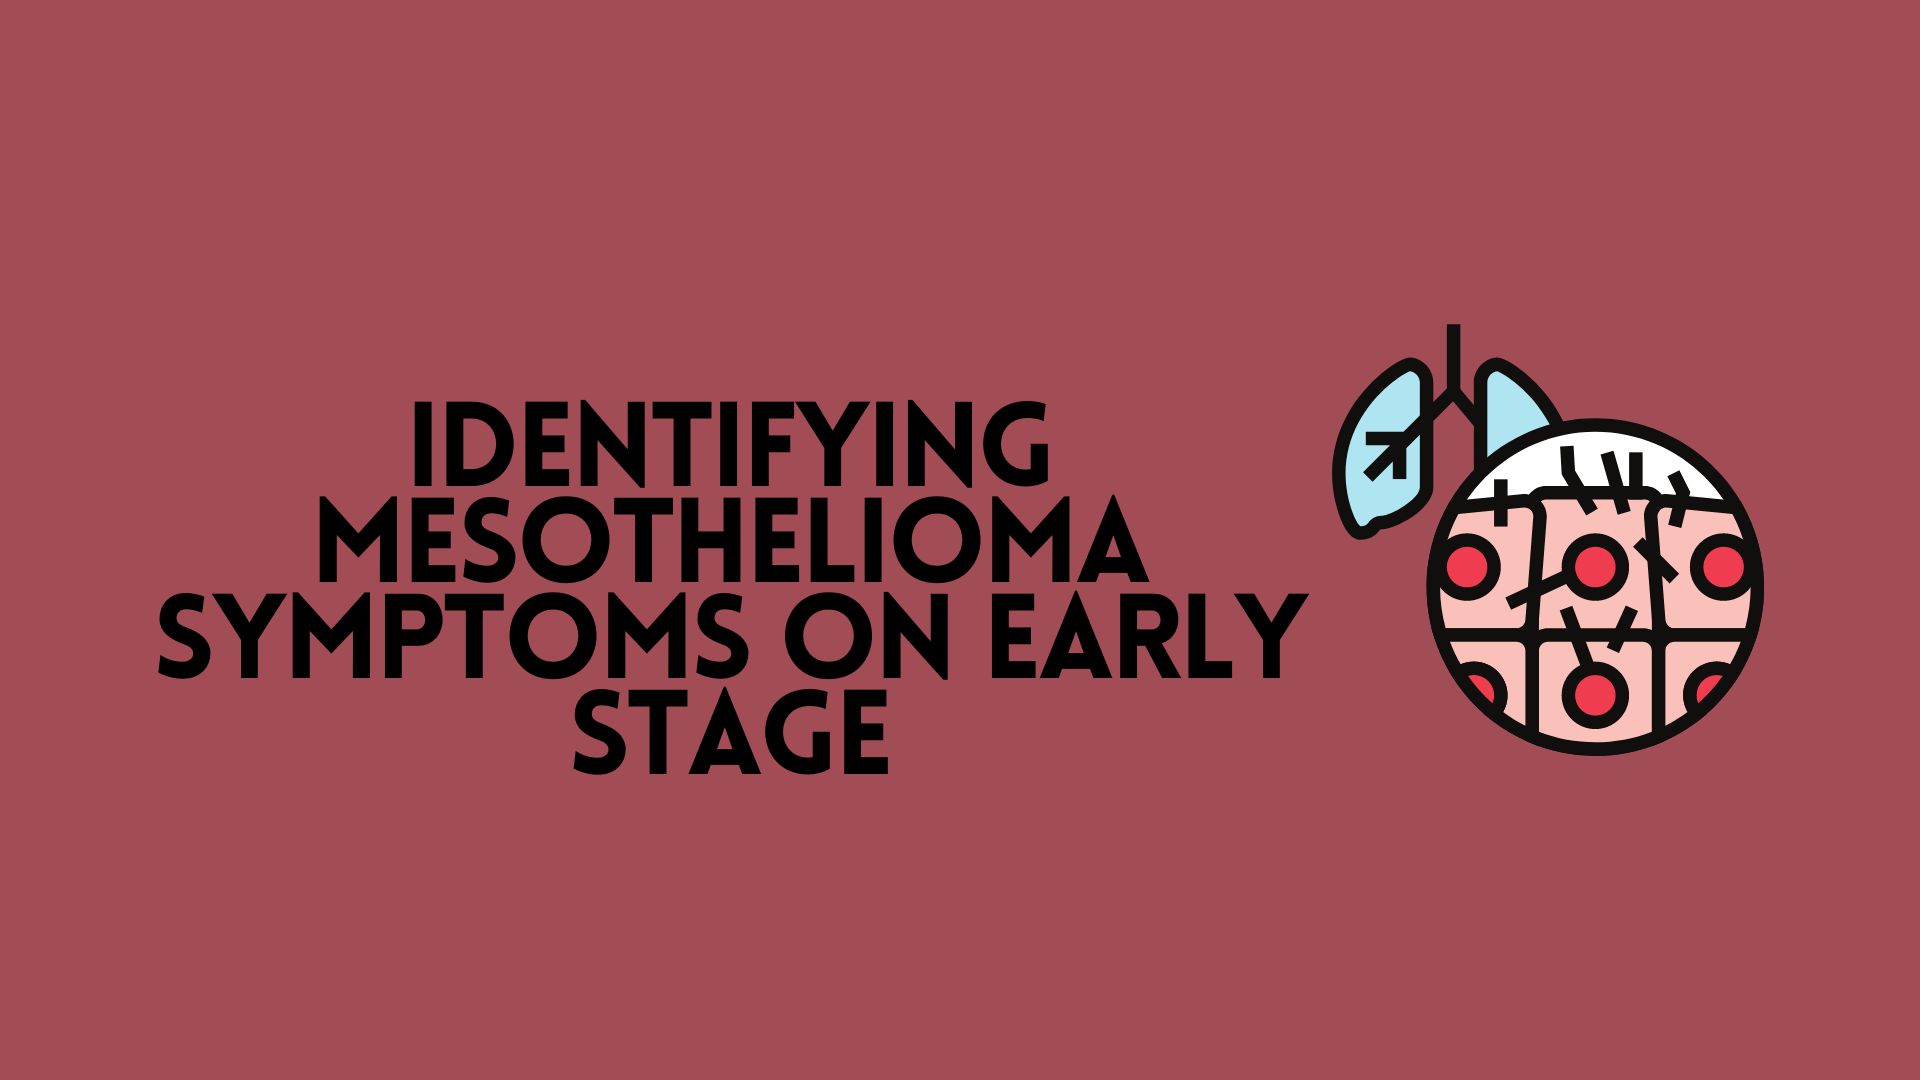 Identifying Mesothelioma Symptoms On Early Stage